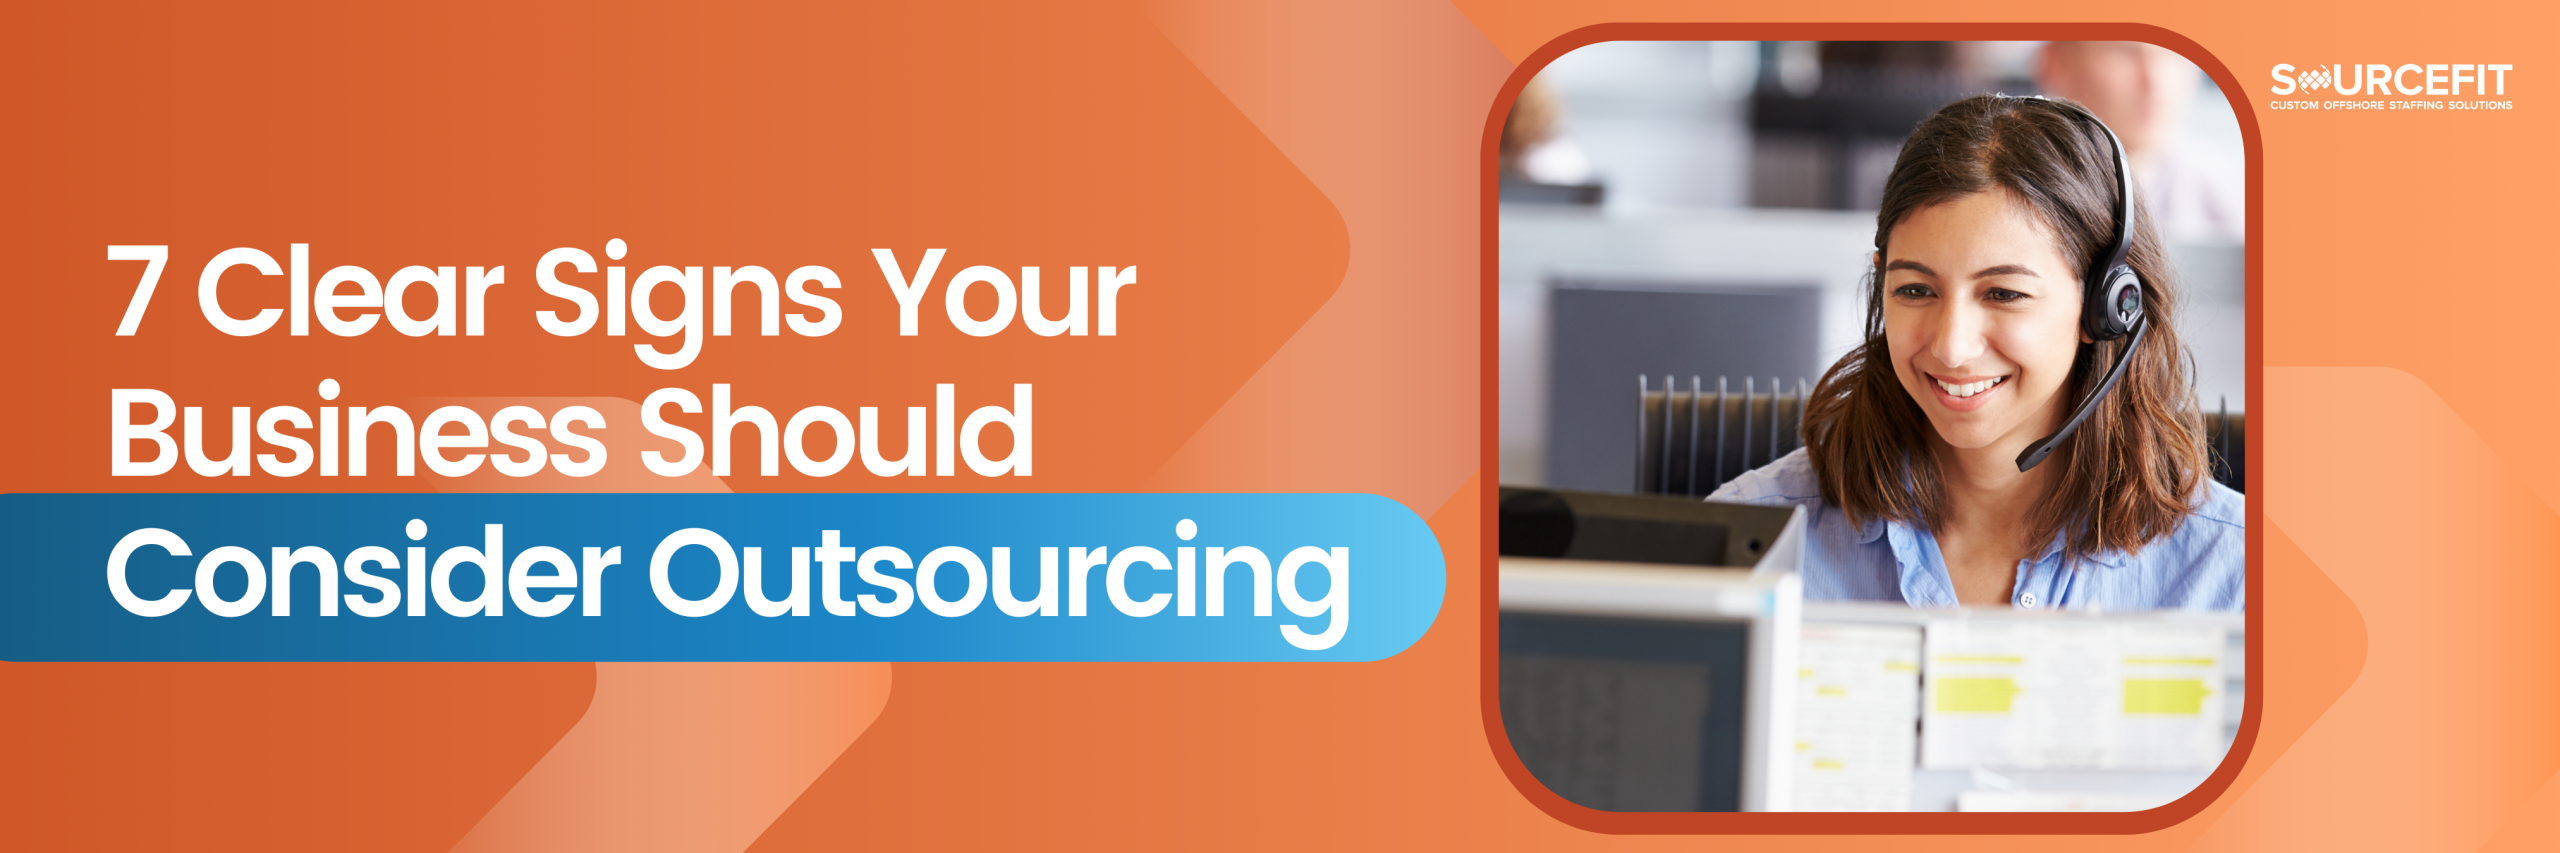 7 Clear Signs Your Business Should Consider Outsourcing